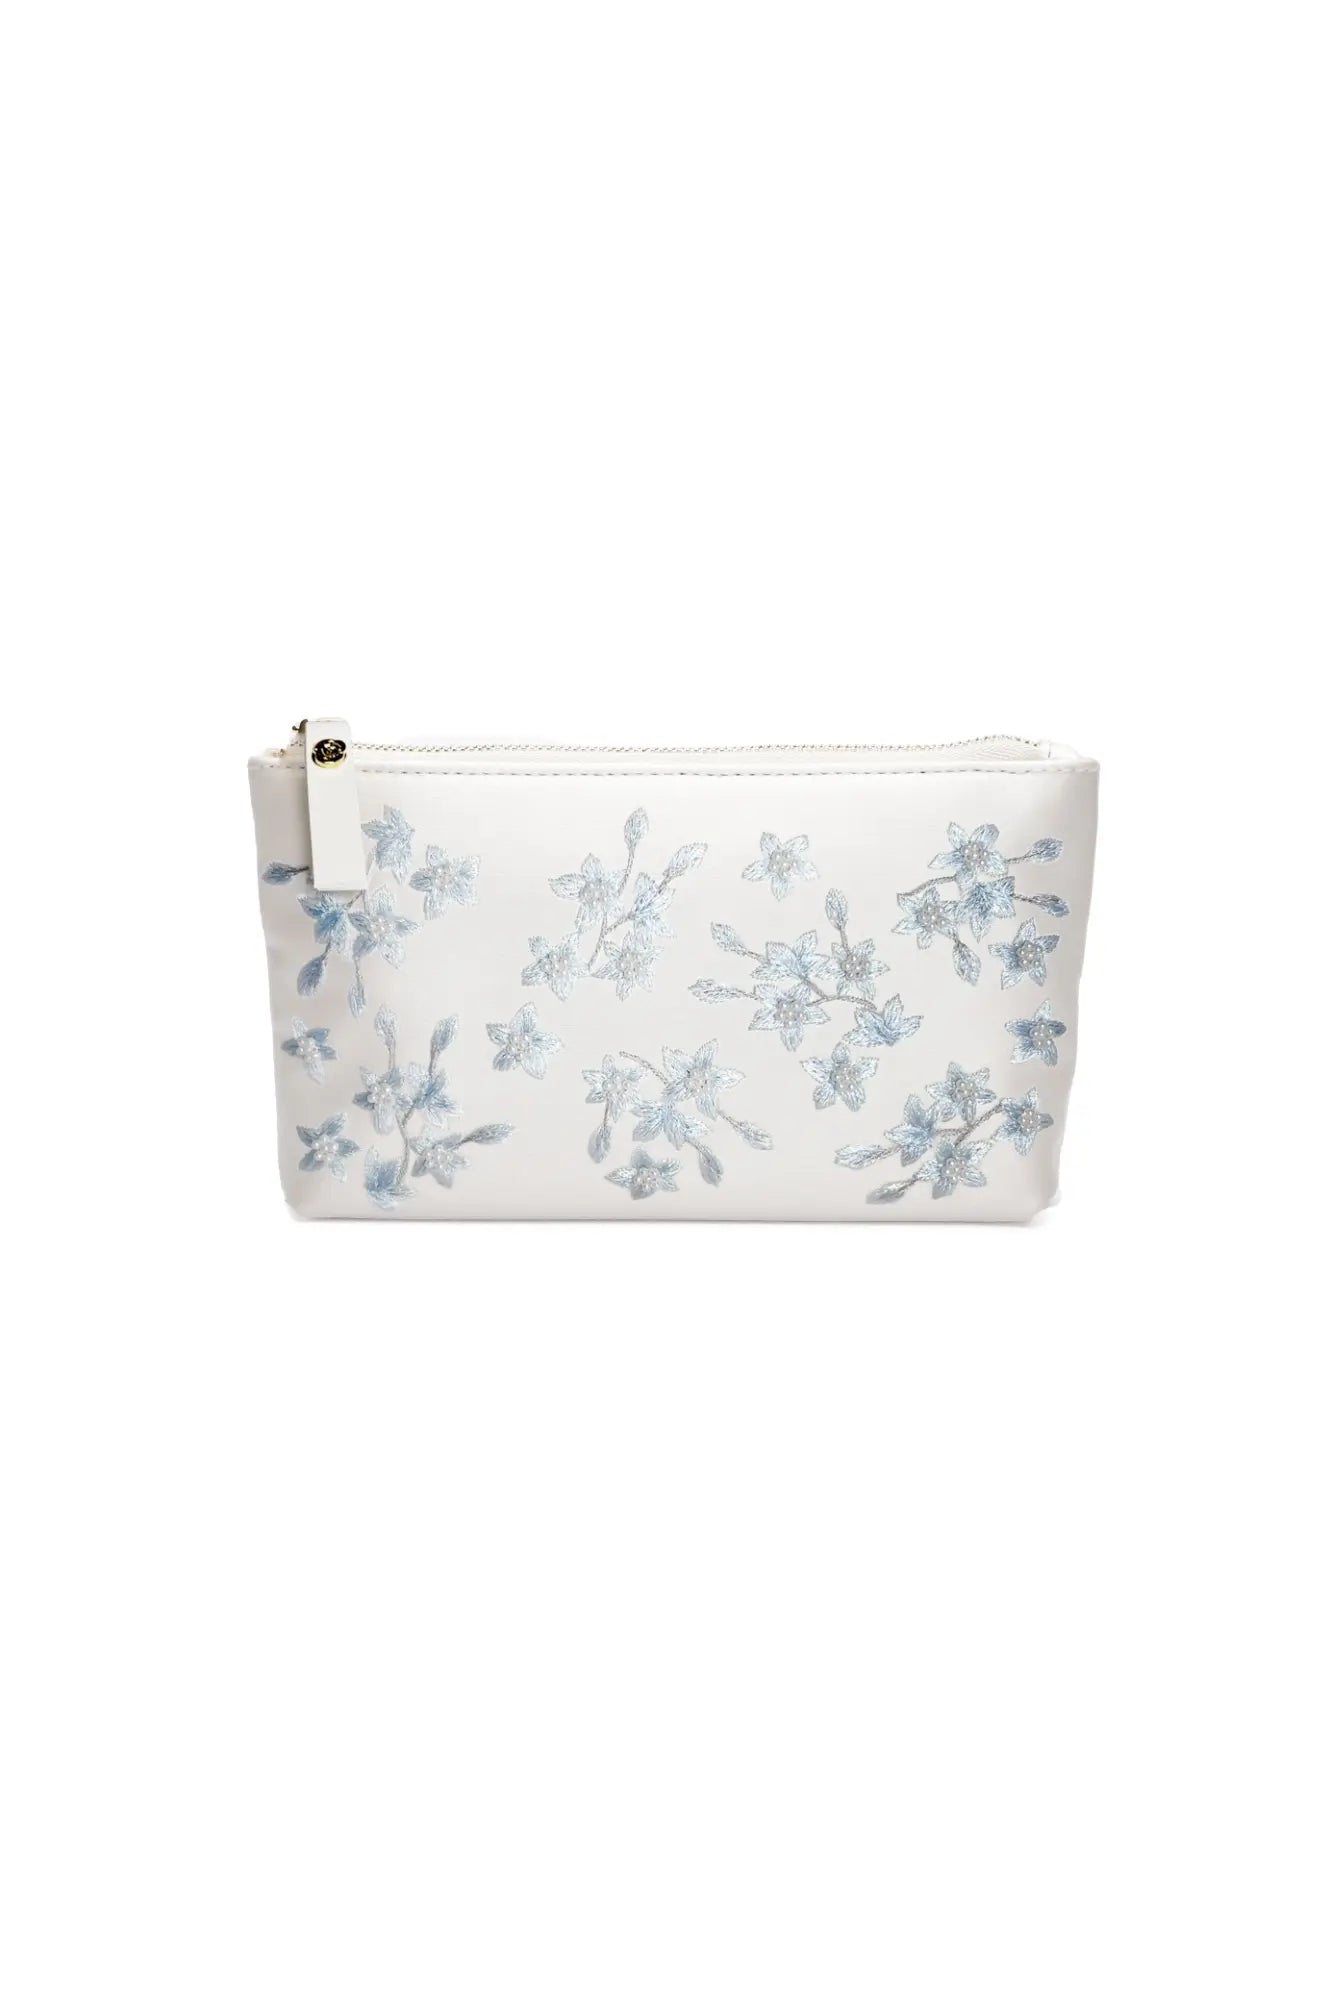 Mia Acrylic Clutch with Ivory Pouch Blue Flowers from The Bella Rosa Collection with a zipper closure.